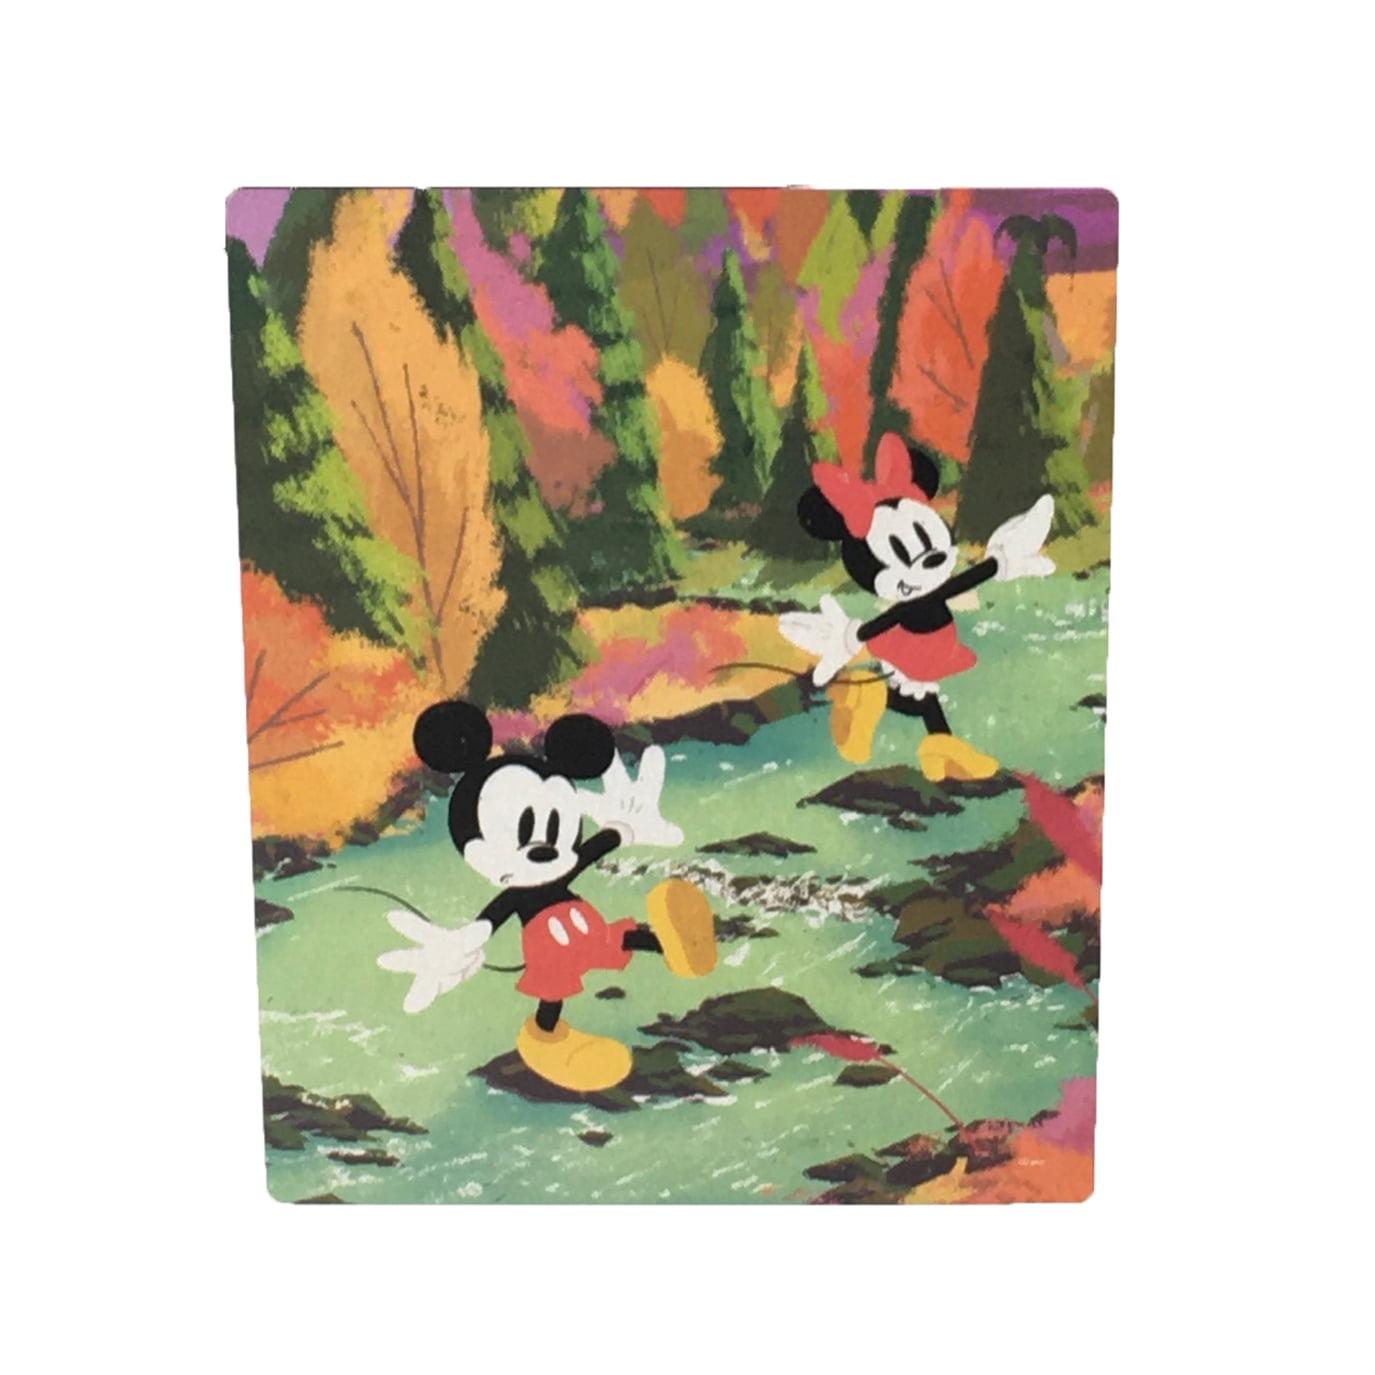 Jigsaw Puzzle DISNEY CHARACTERS Minnie Mouse 500 Piece 14" x 11" Cardinal S2 